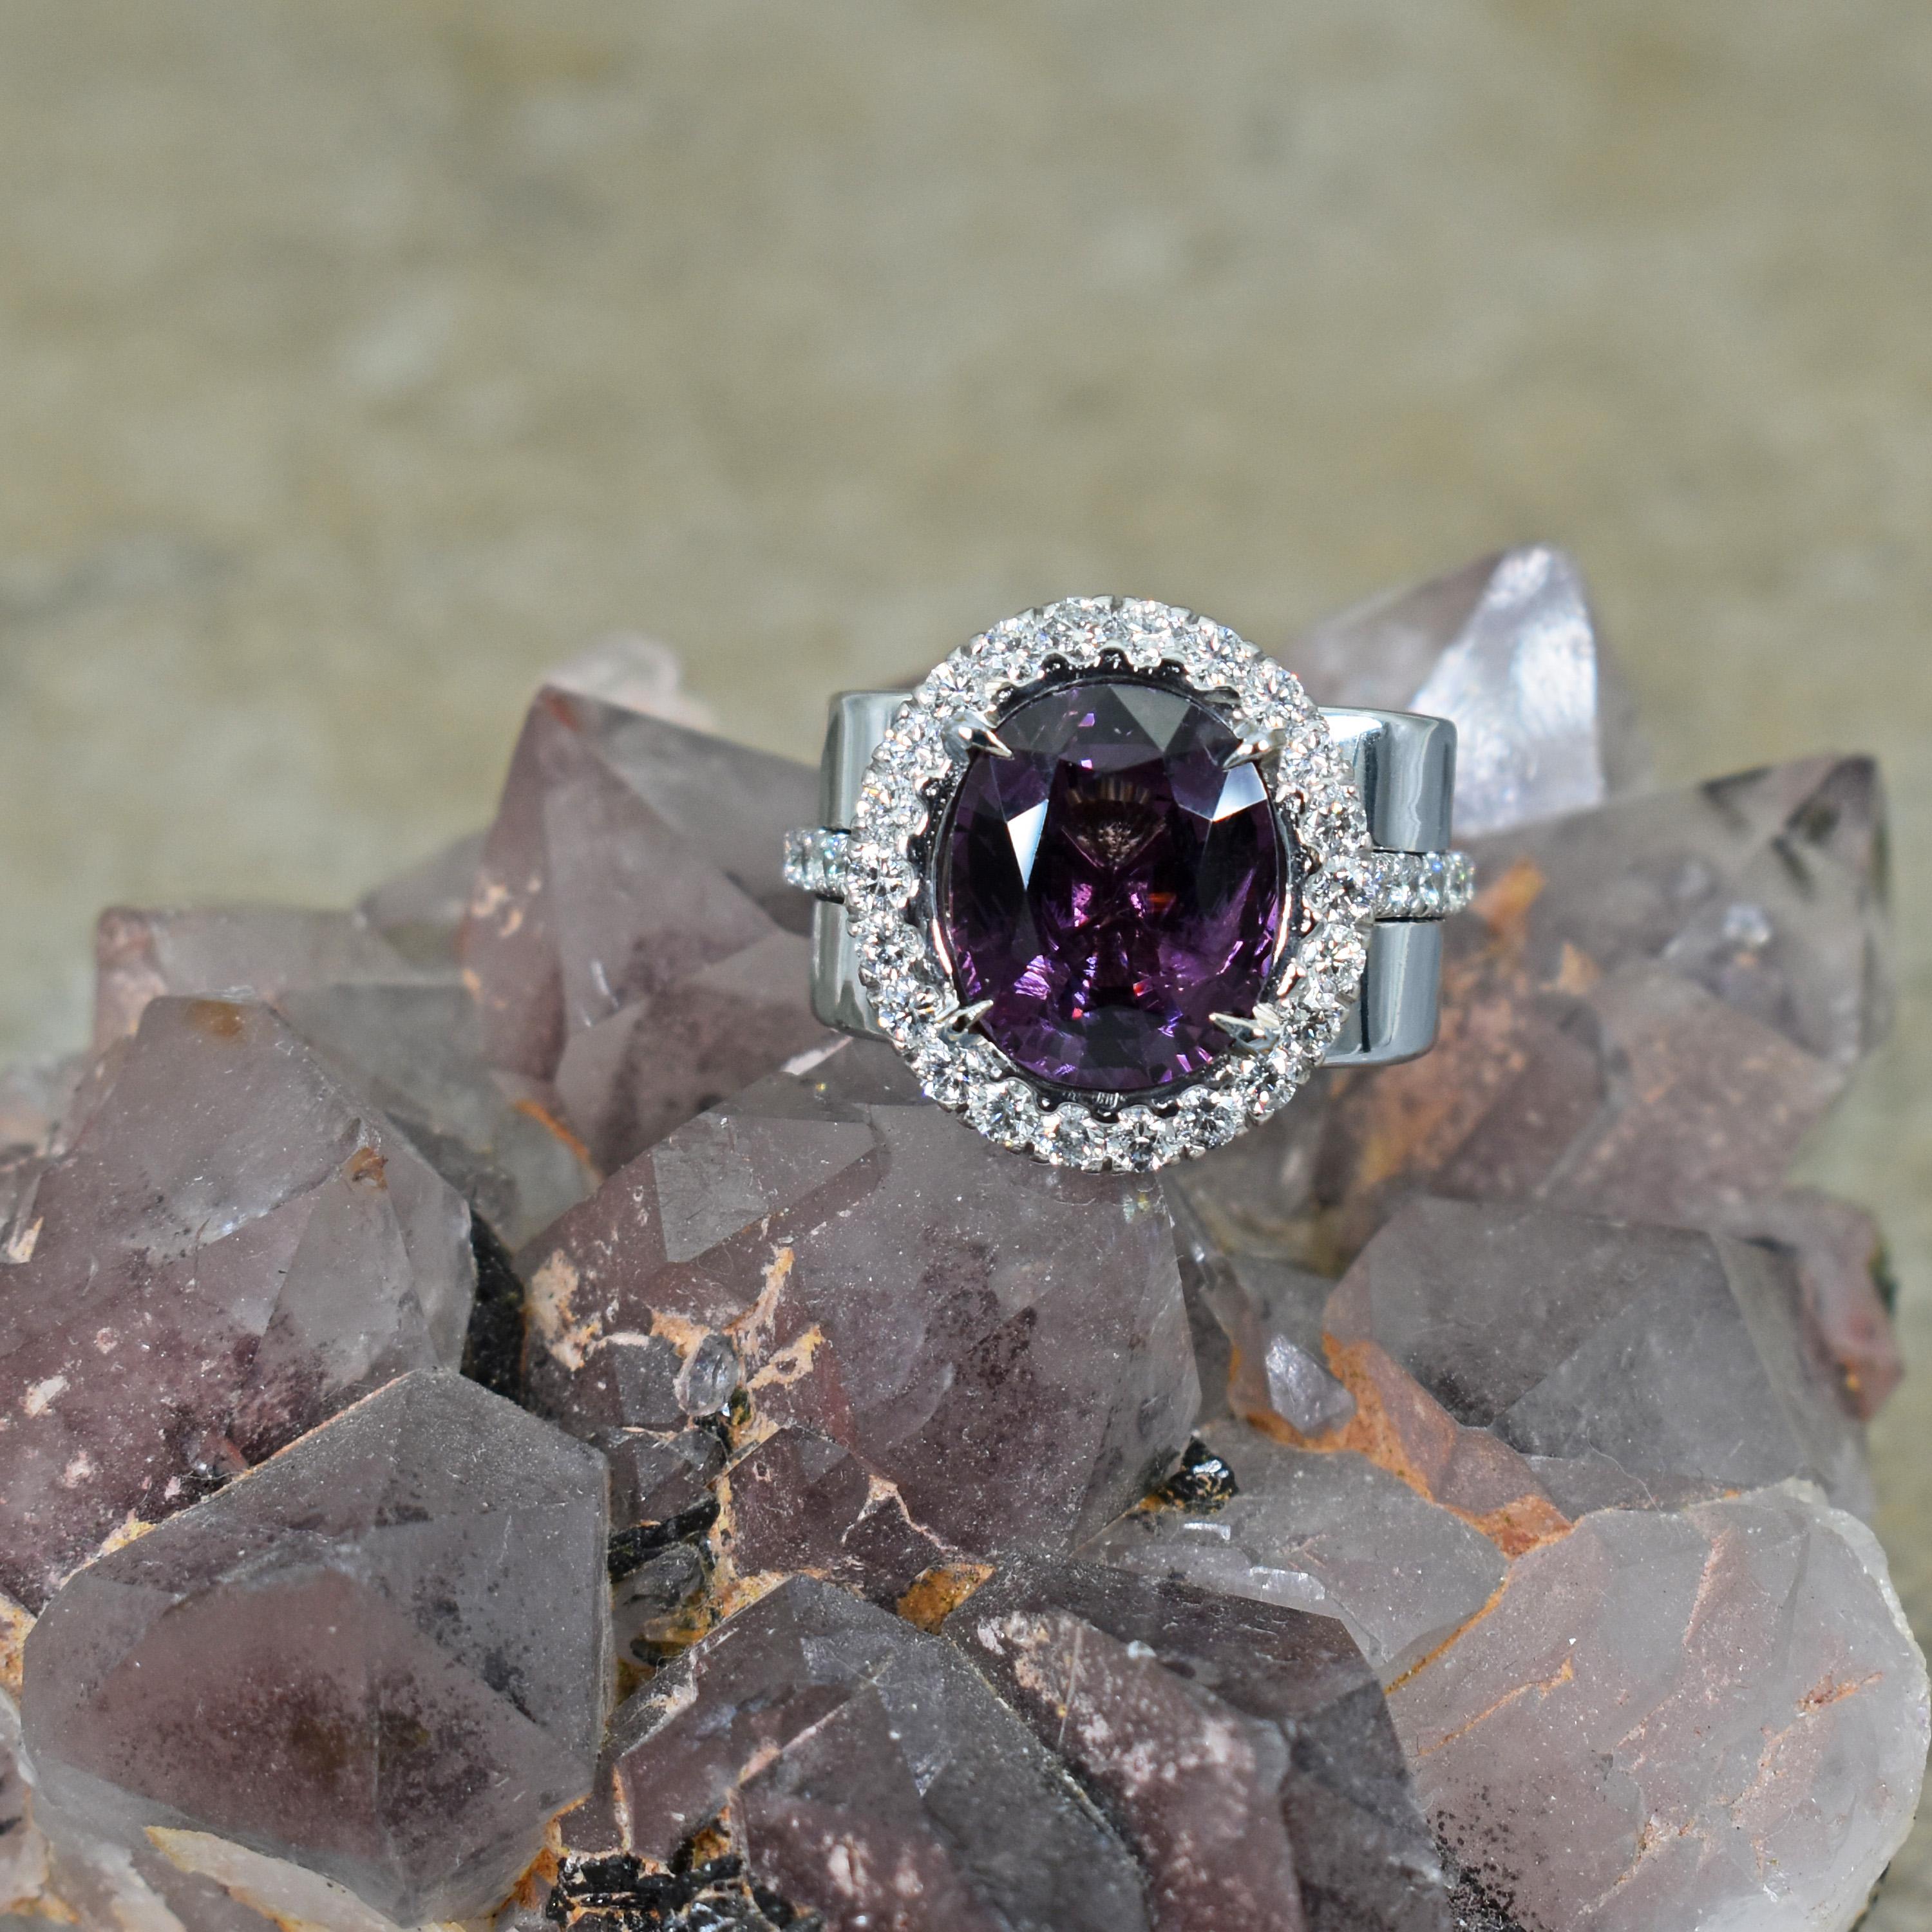 5.75 carat oval-cut regal Purple Spinel and white Diamond (1.11 carat total weight; G-H, SI3-I1) halo 14k white gold cocktail ring. Ring is size 7. Tapered white gold band ranges from 9mm to 12mm at widest point. Setting and stone sits 7mm tall off